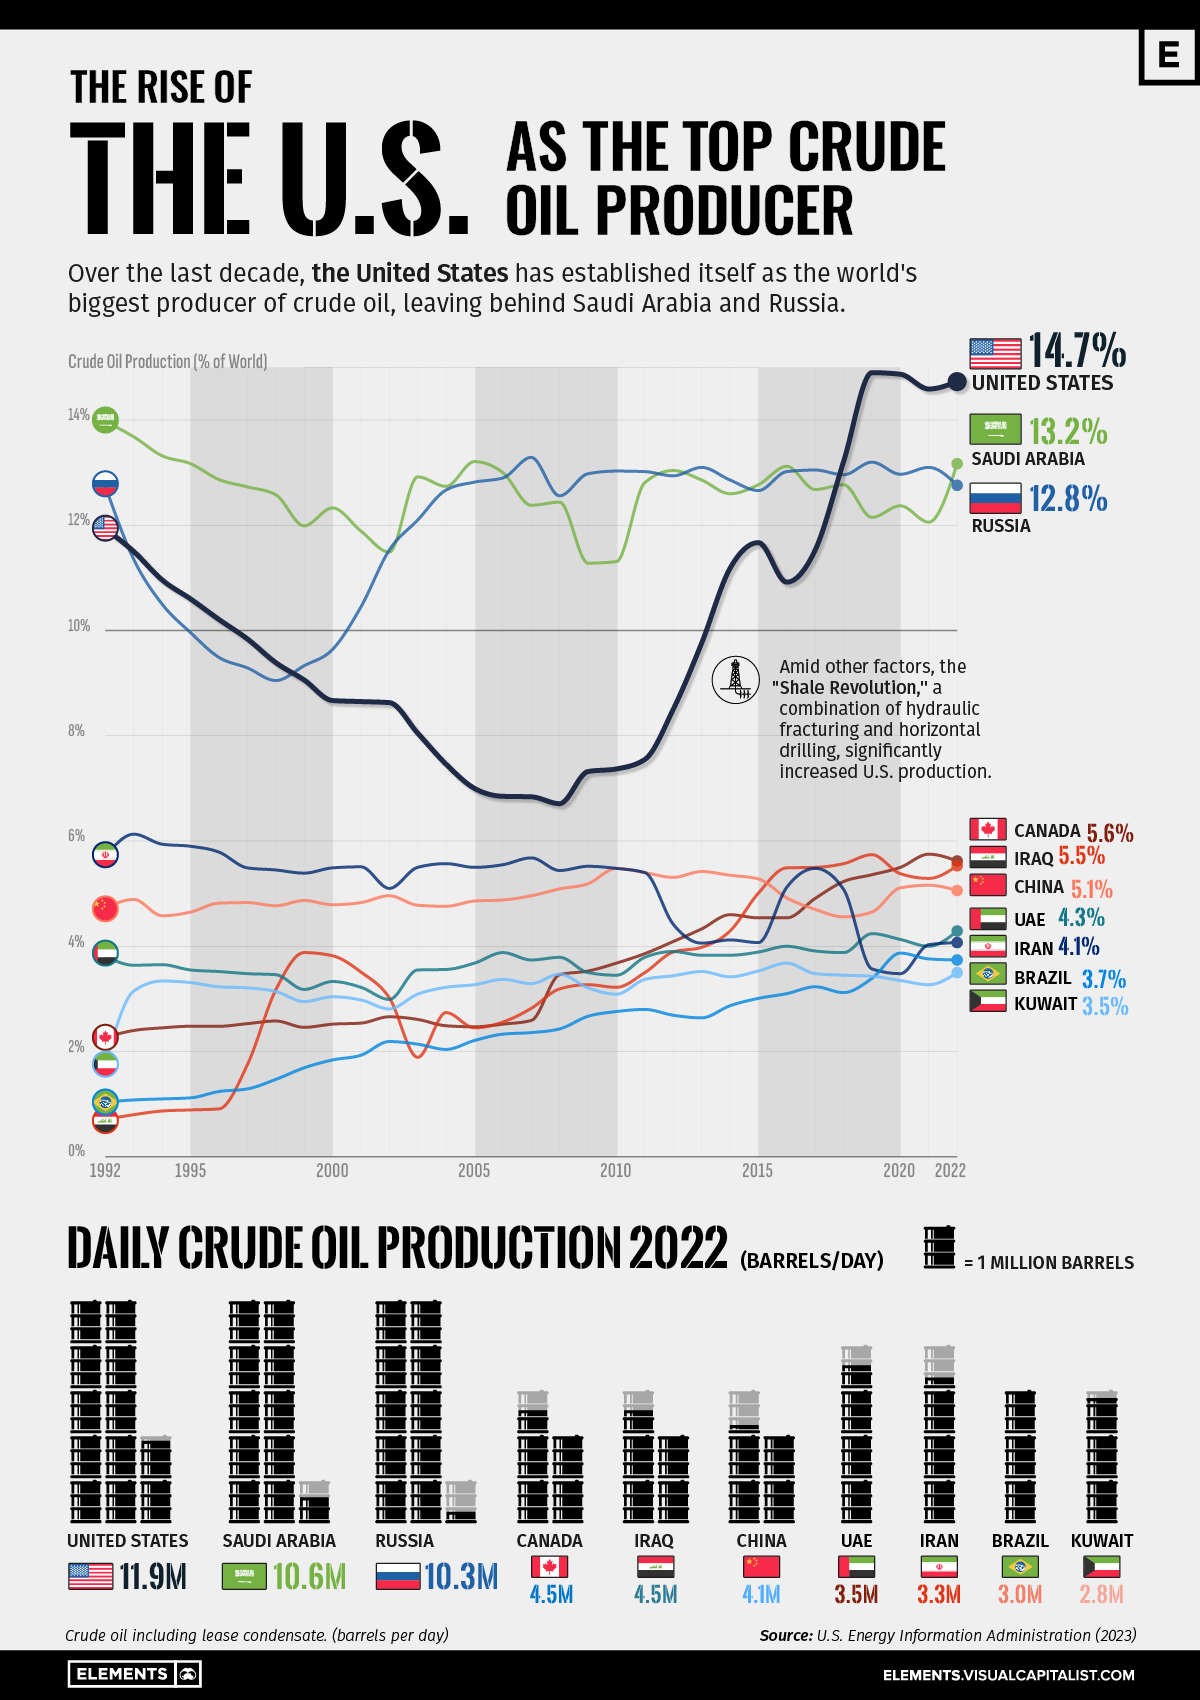 Line chart showing how the U.S. has surpassed Saudi Arabia and Russia as the world's top producer of crude oil.